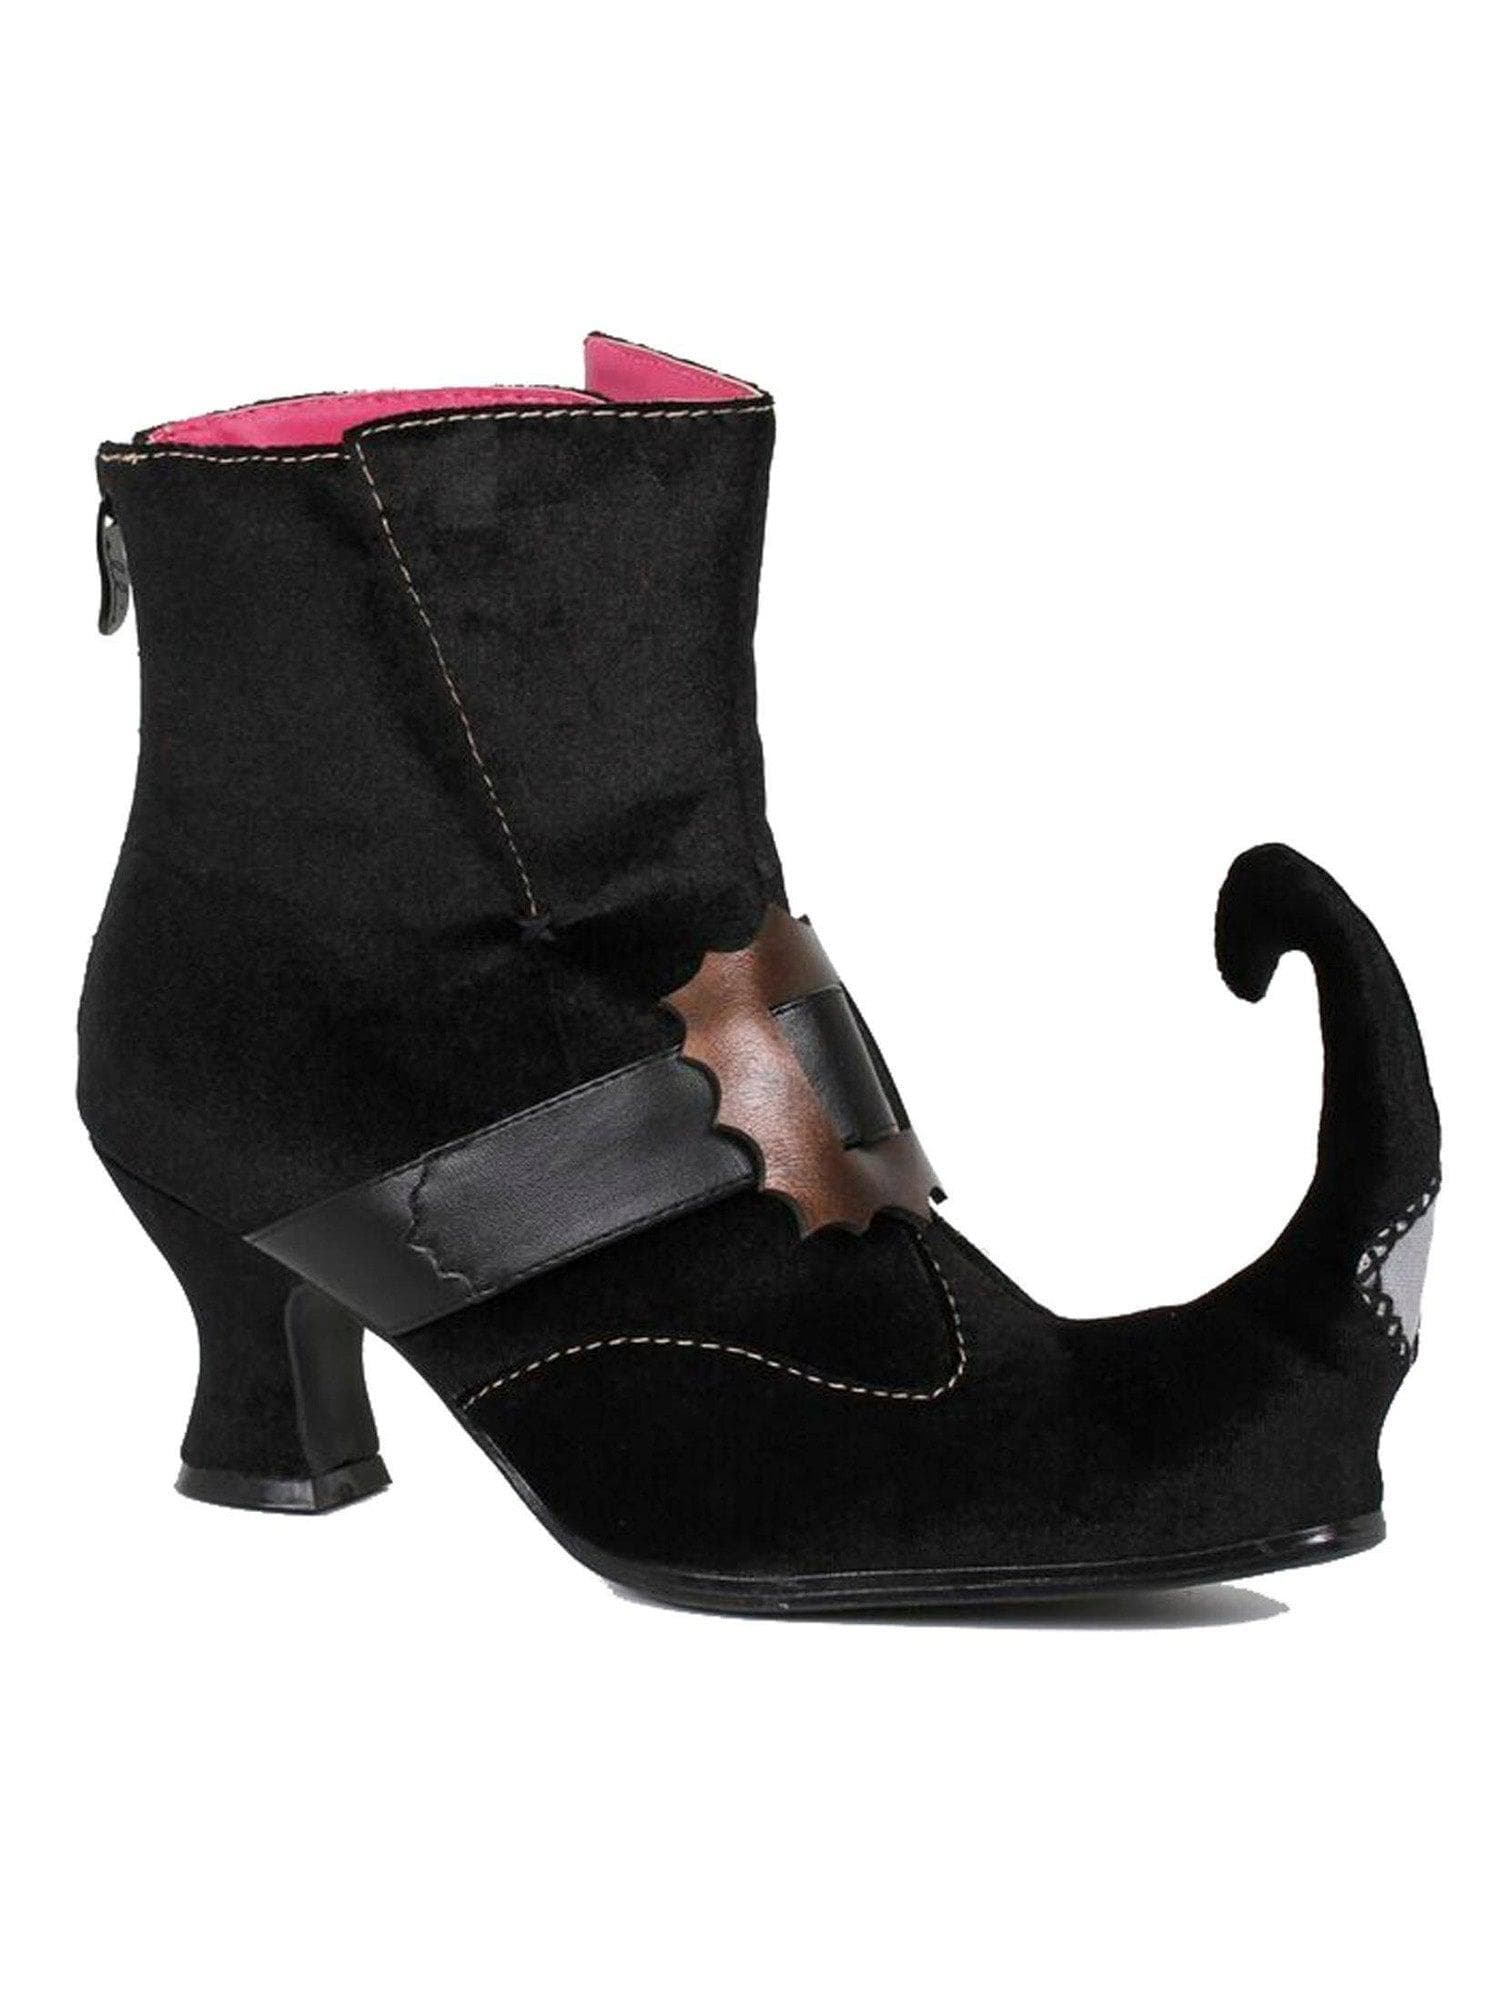 Adult Black Buckled Witch Boots - costumes.com